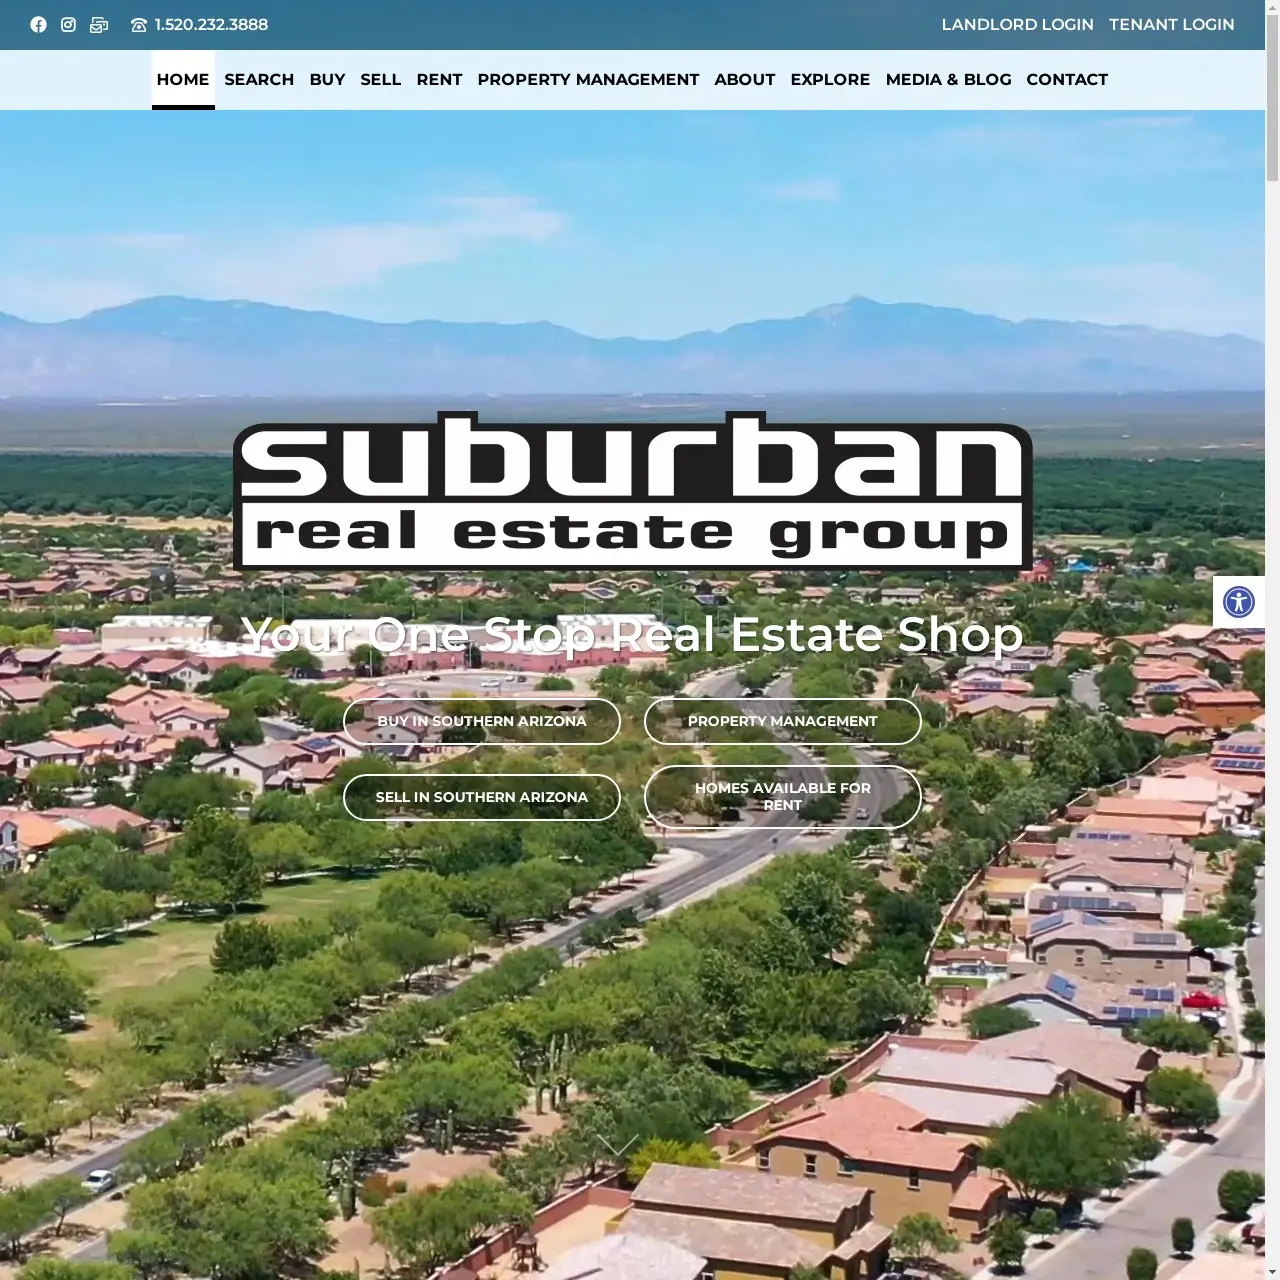 Discover the exceptional services provided by Suburban Real Estate Group as Shield Bar Marketing designs their new website, creates email drip campaigns, and handles social media content creation, ensuring an elevated experience for clients on their path to homeownership. Check out John's Google review to see the impact of our collaboration.